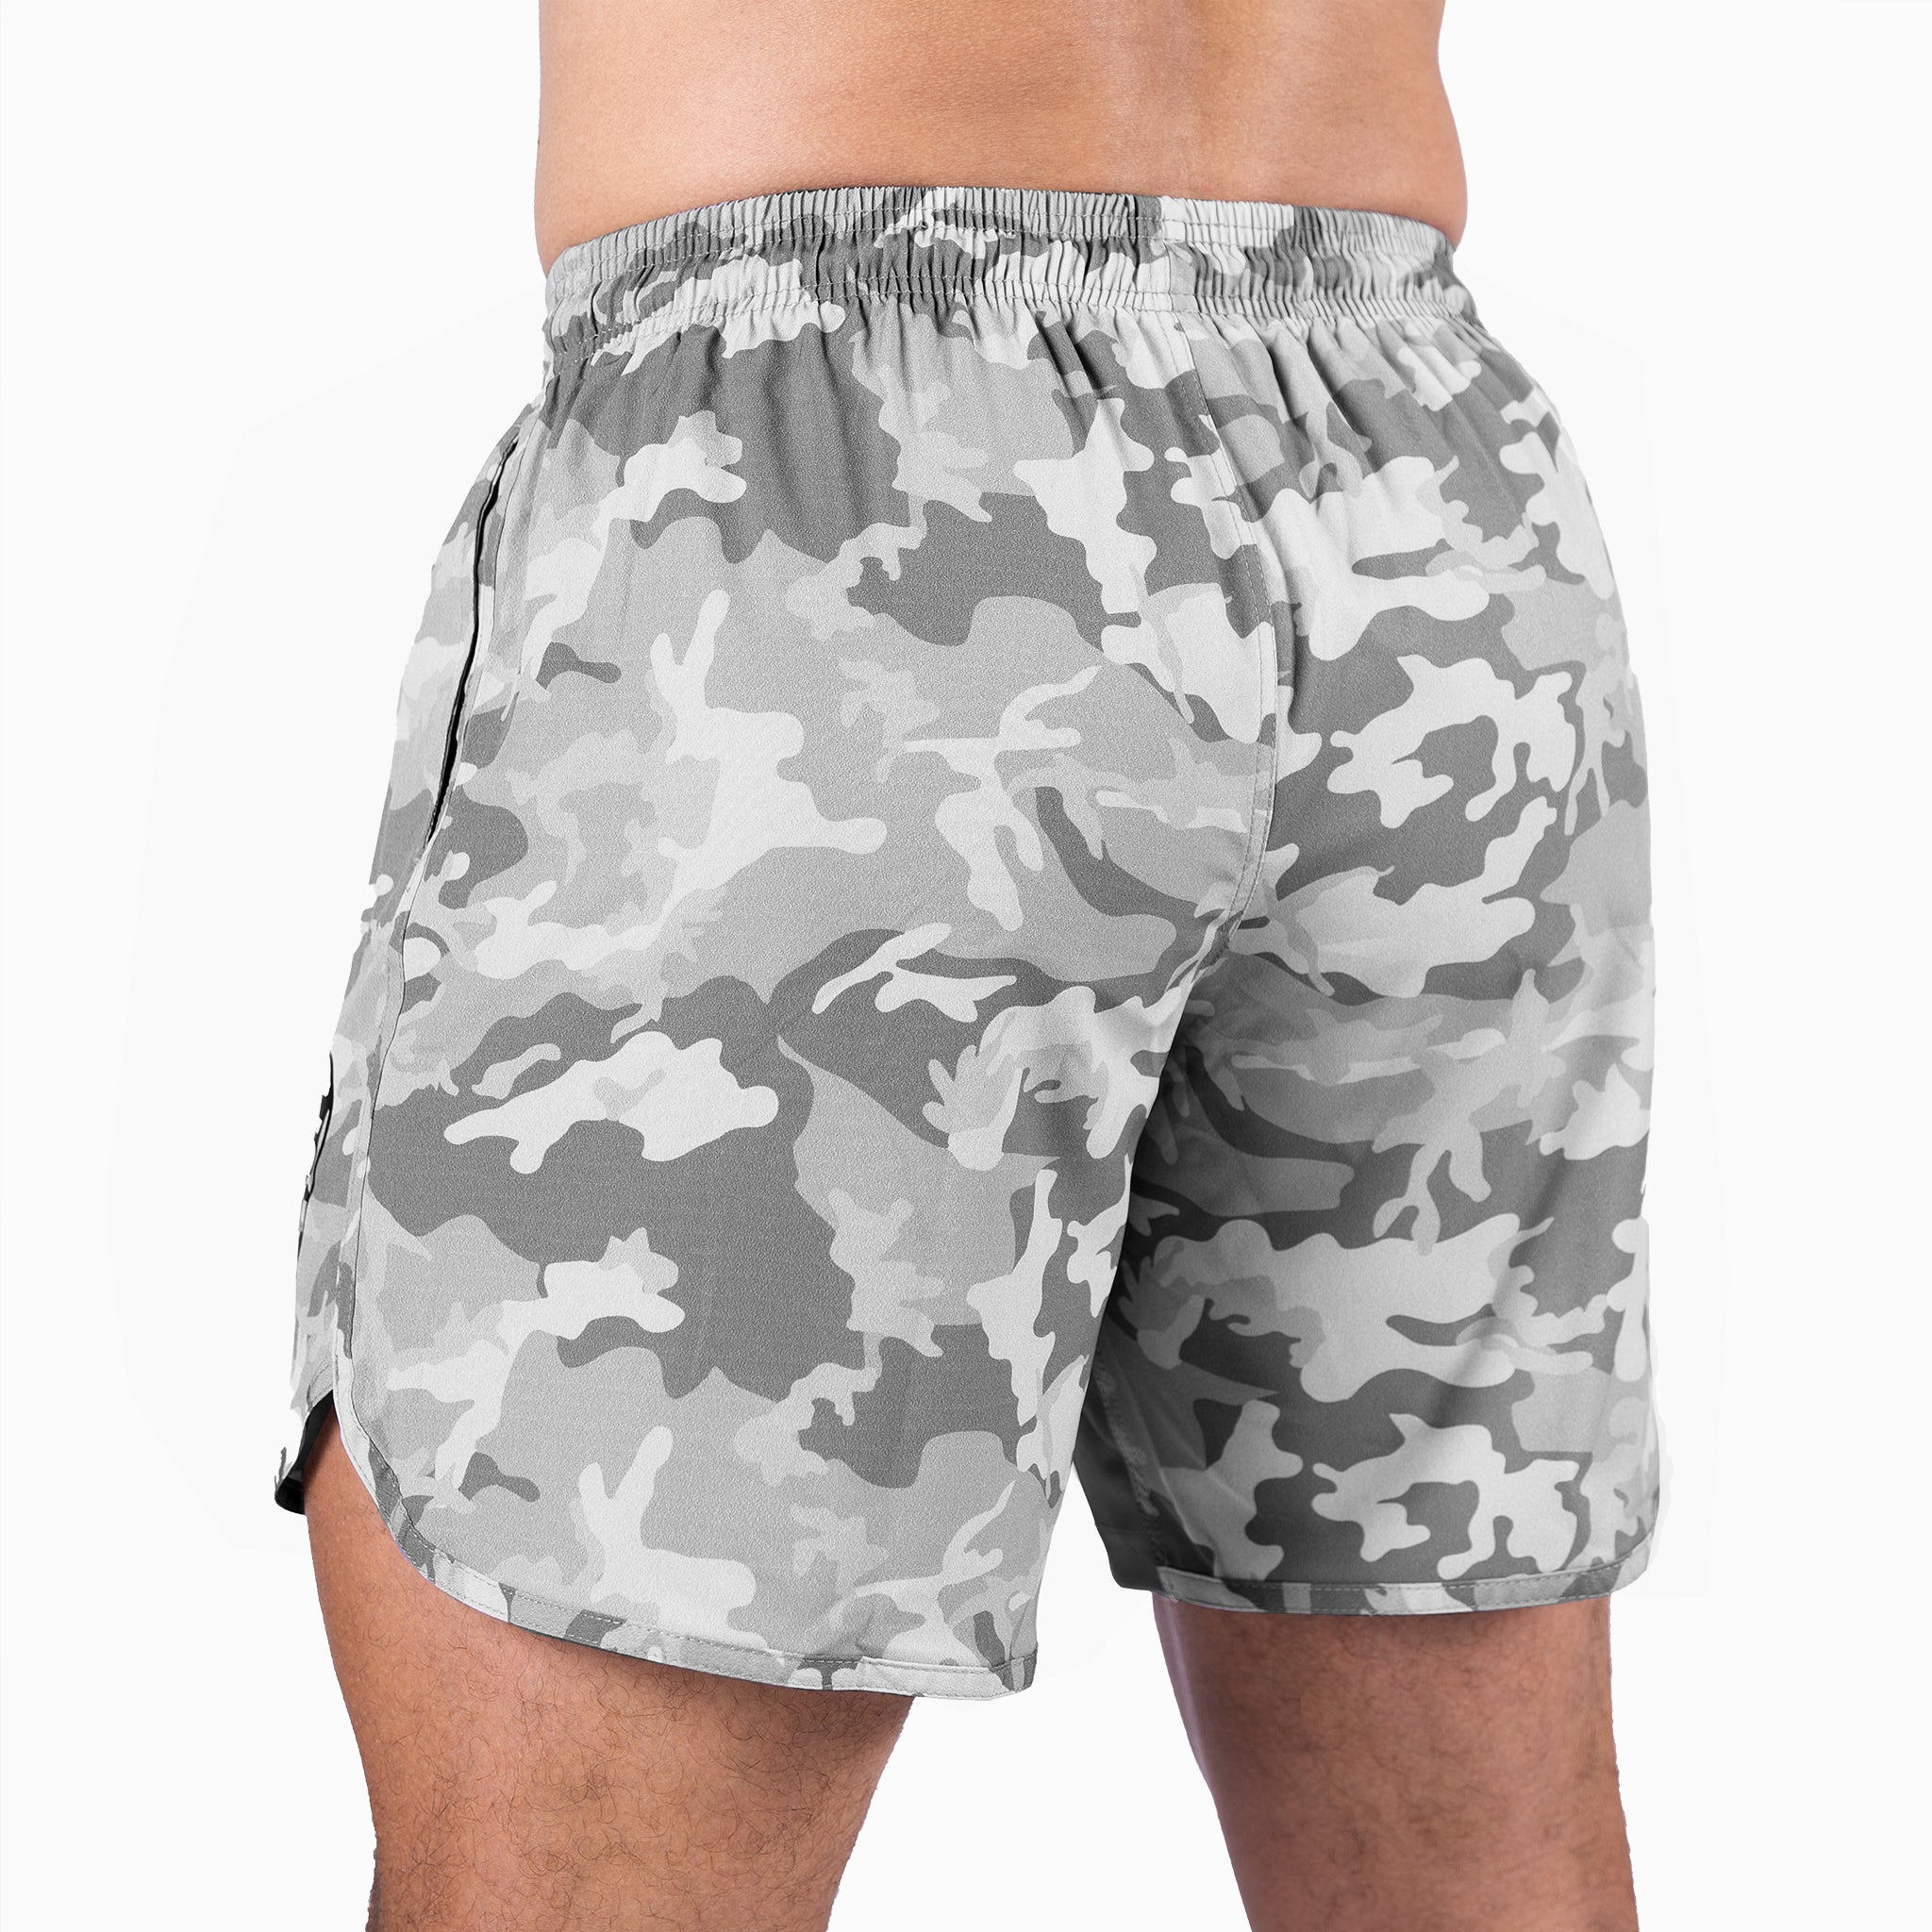 gr training shorts white camo cropped rear new